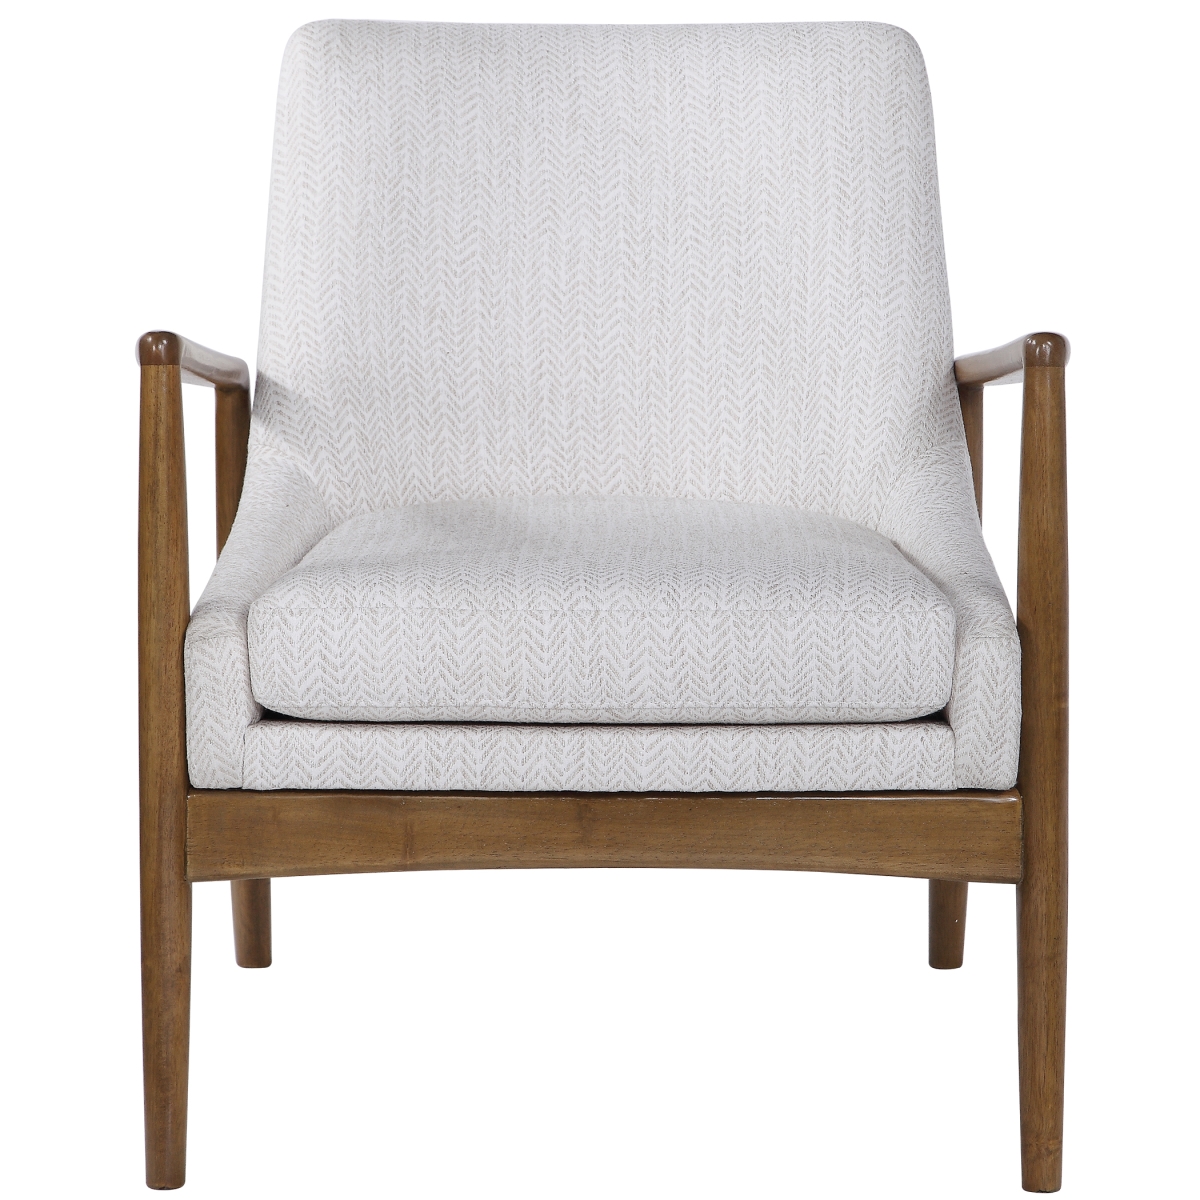 Picture of 212 Main 23519 Bev White Accent Chair